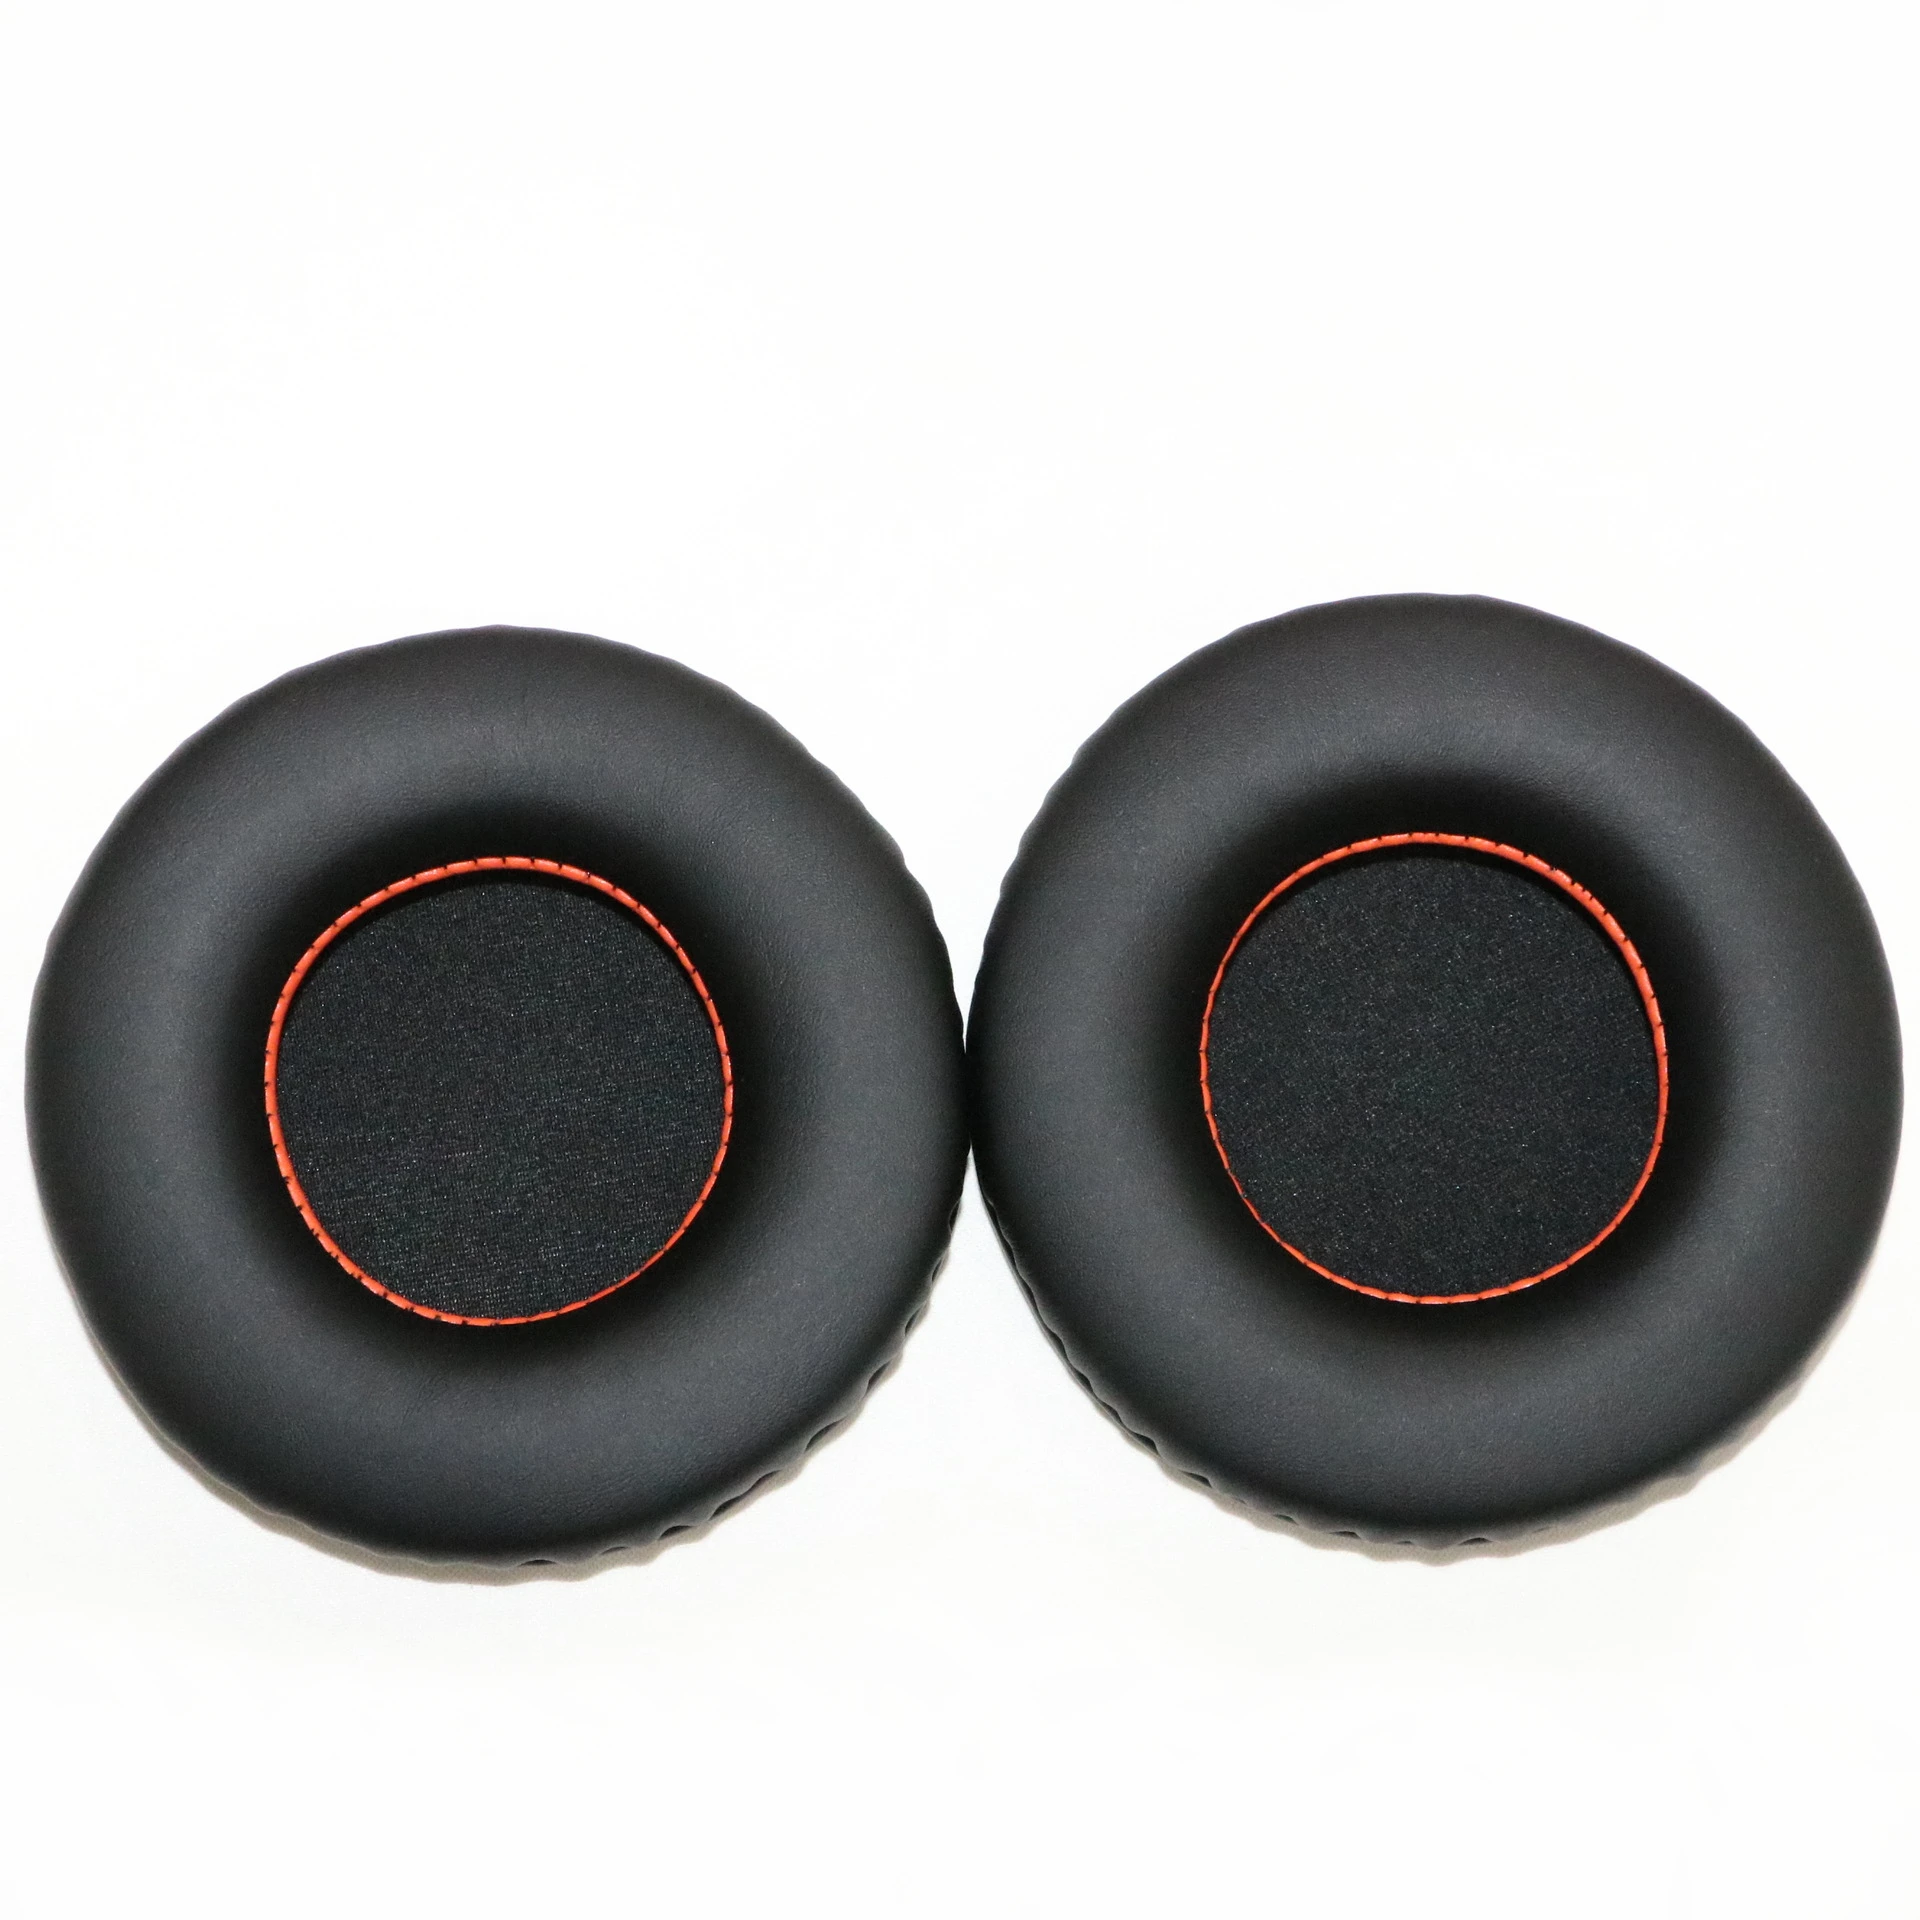 kød plade flyde Source PU leather ear Cushion fits for Steelseries 100 150 Over-ear  Headphone Replacement Ear Pad 100mm diameter universal earpads on  m.alibaba.com